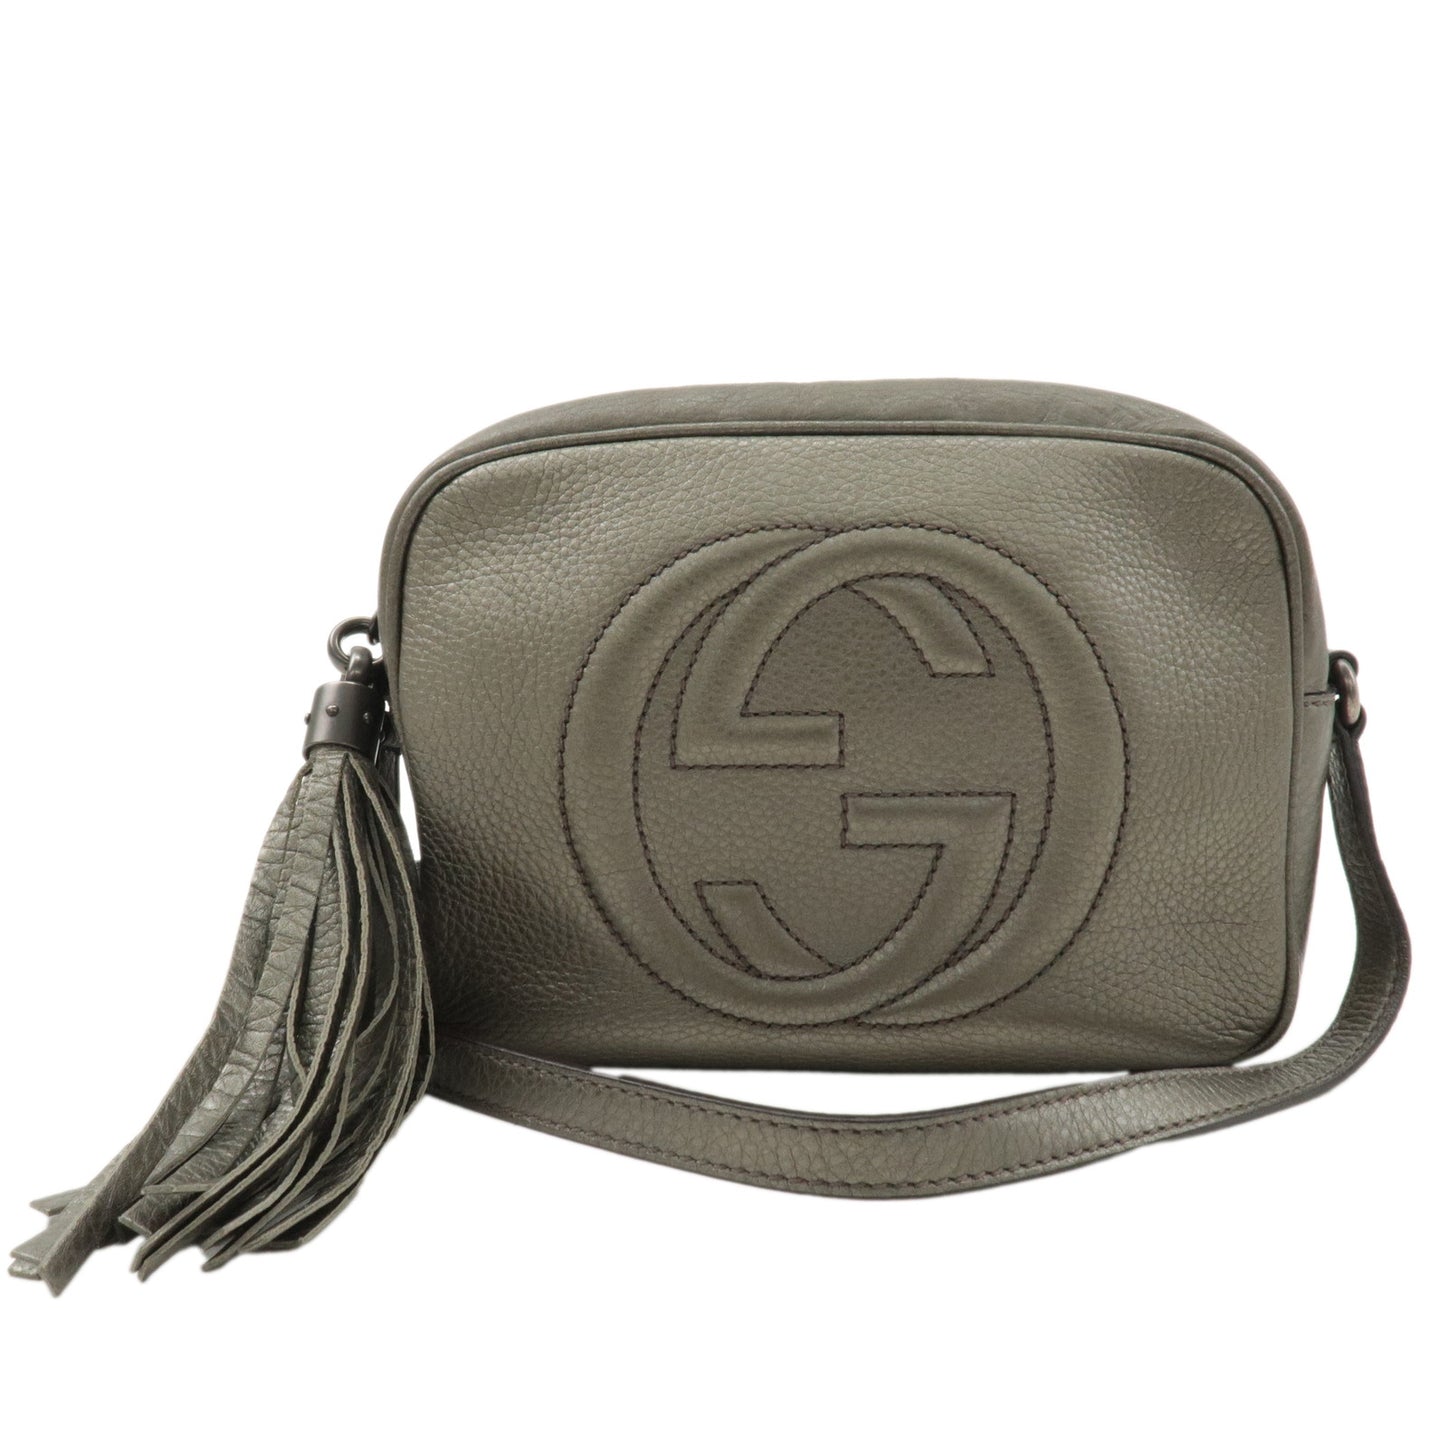 GUCCI SOHO Leather Small Disco Shoulder Bag Silver 308364